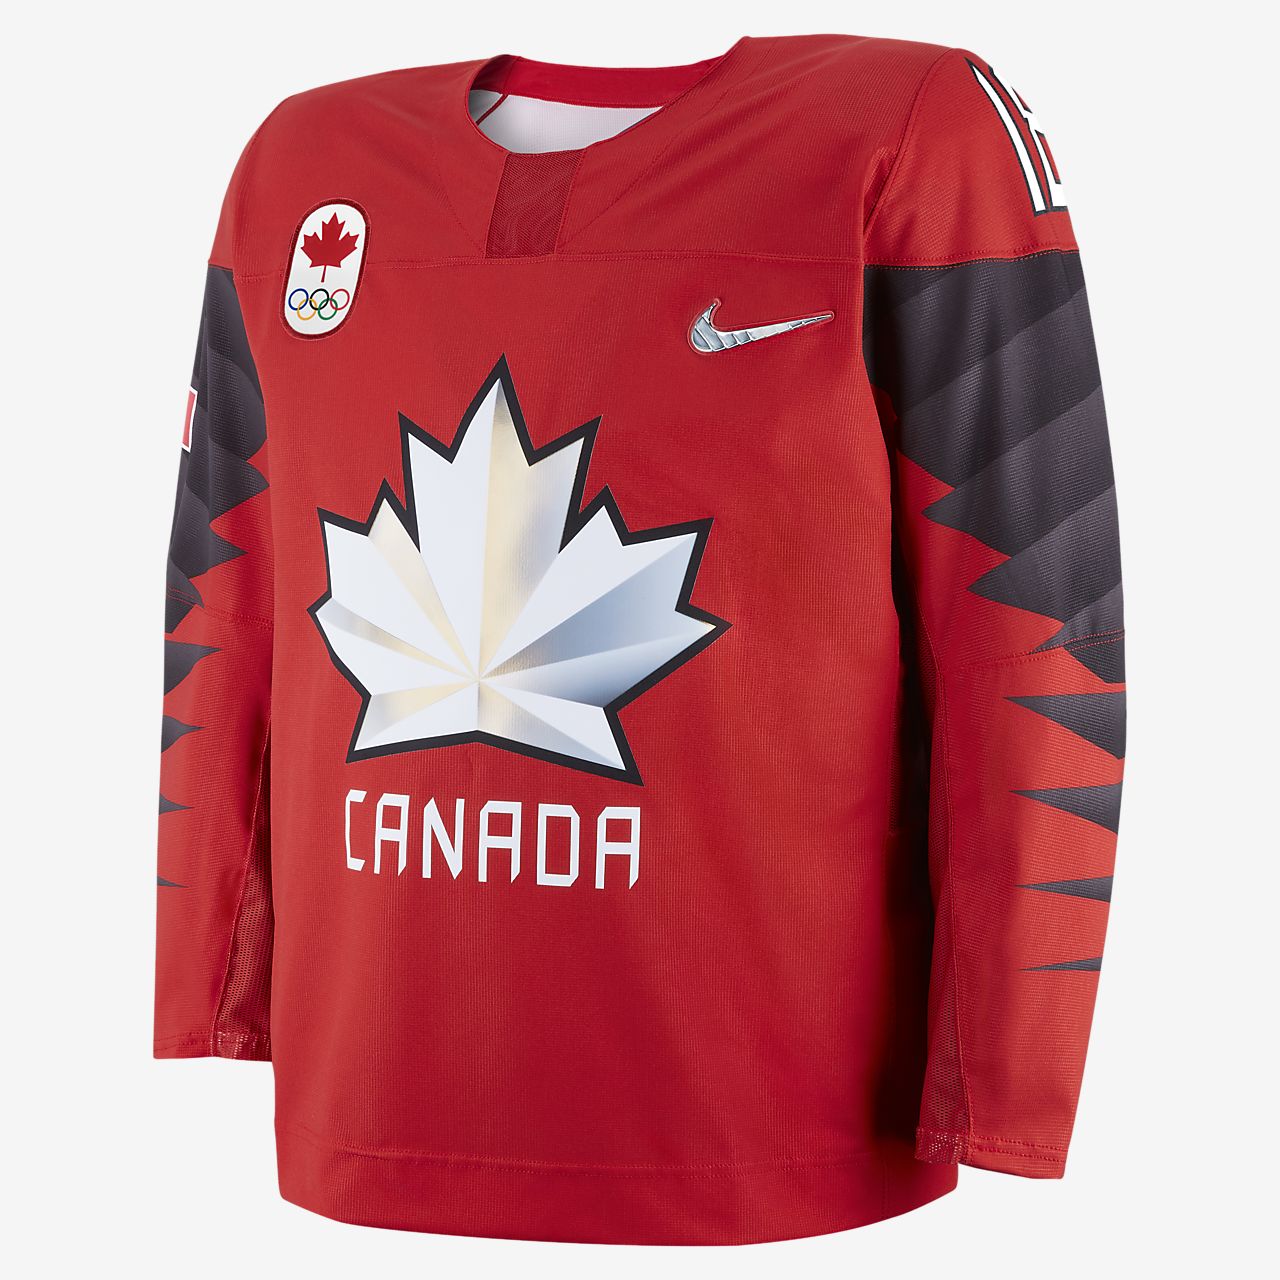 team canada jersey for sale | www 